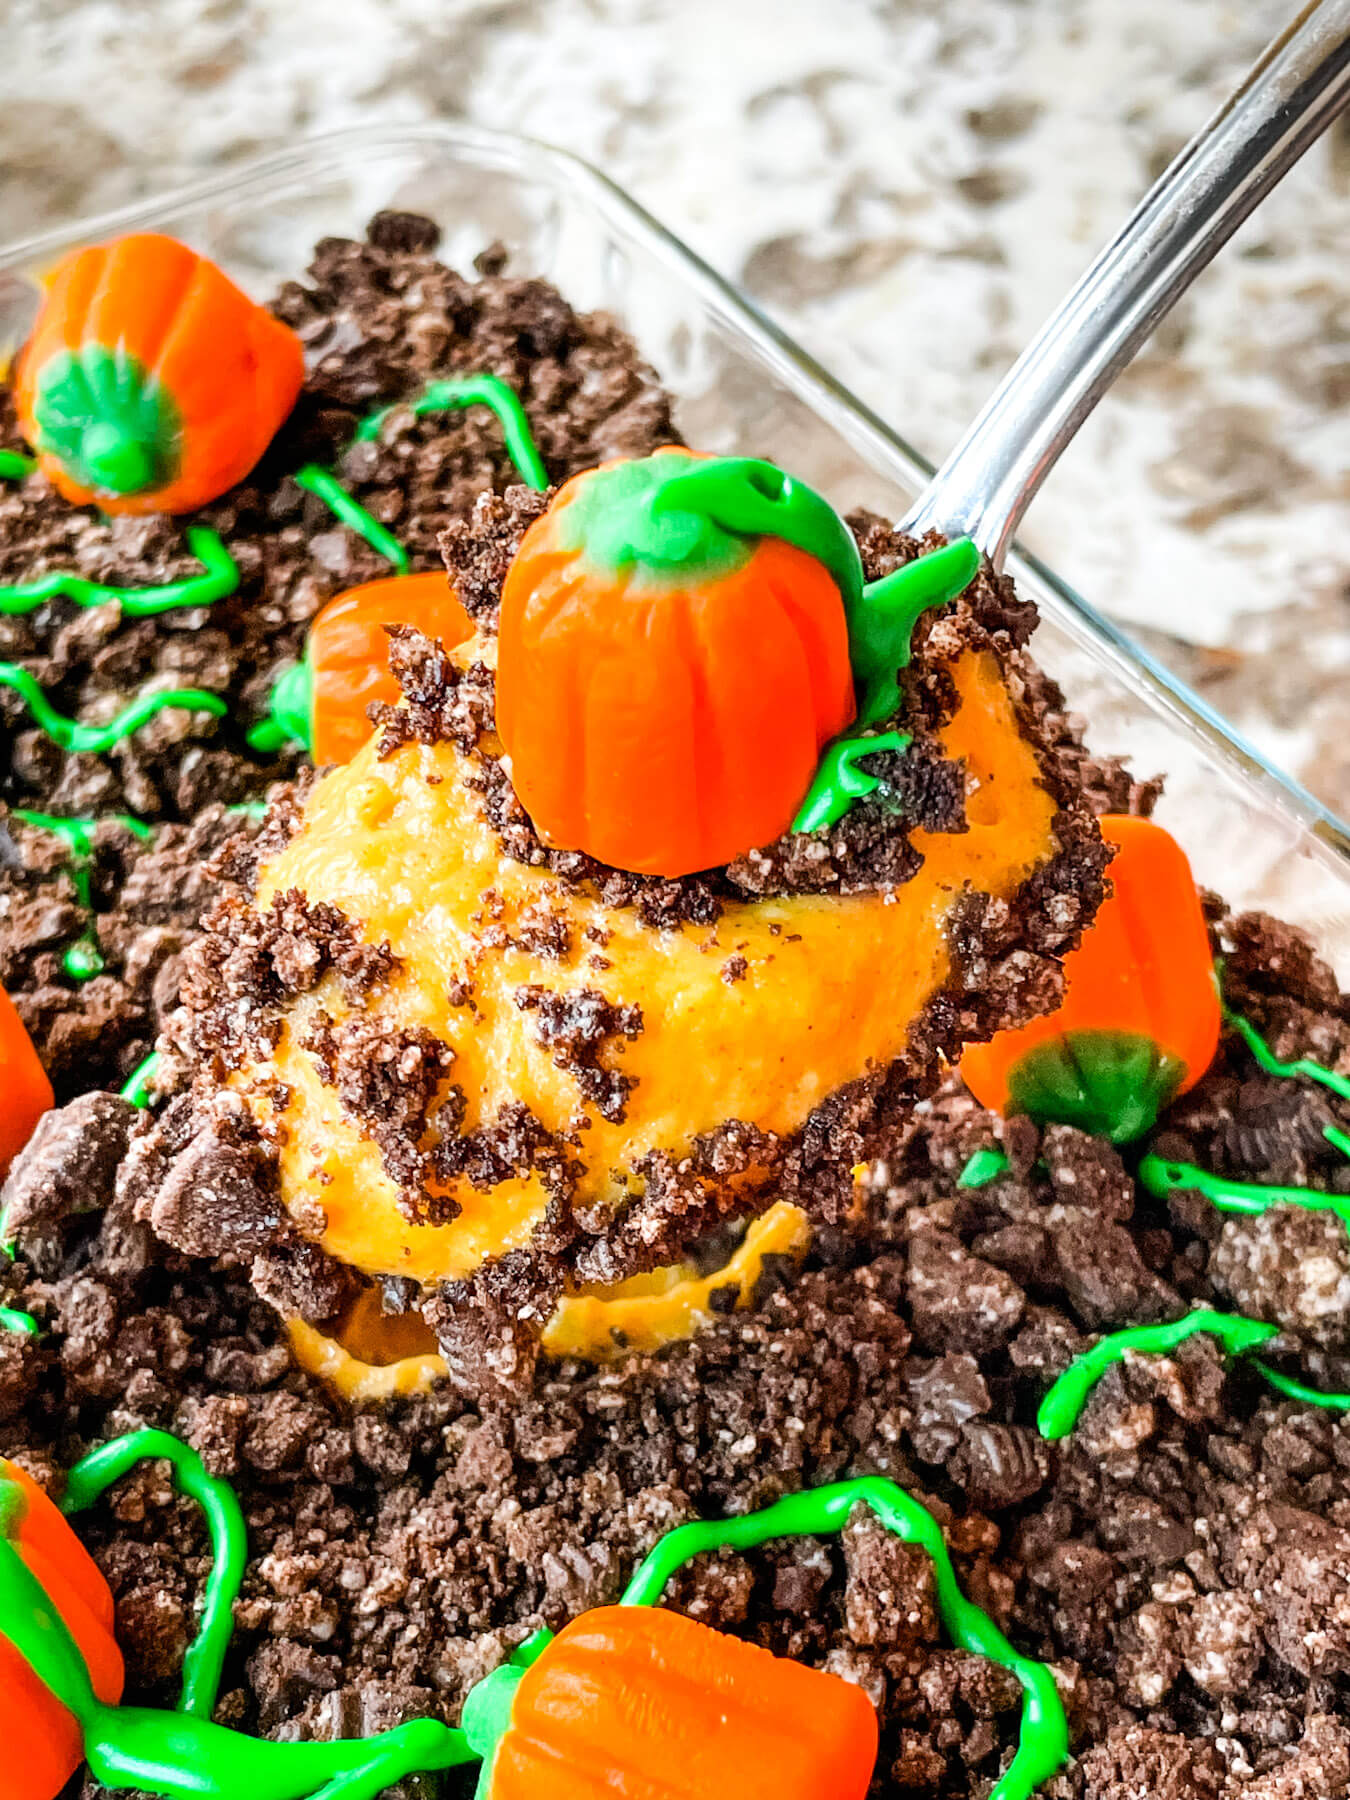 A spoon scooping some pudding out of the dish with a pumpkin on top